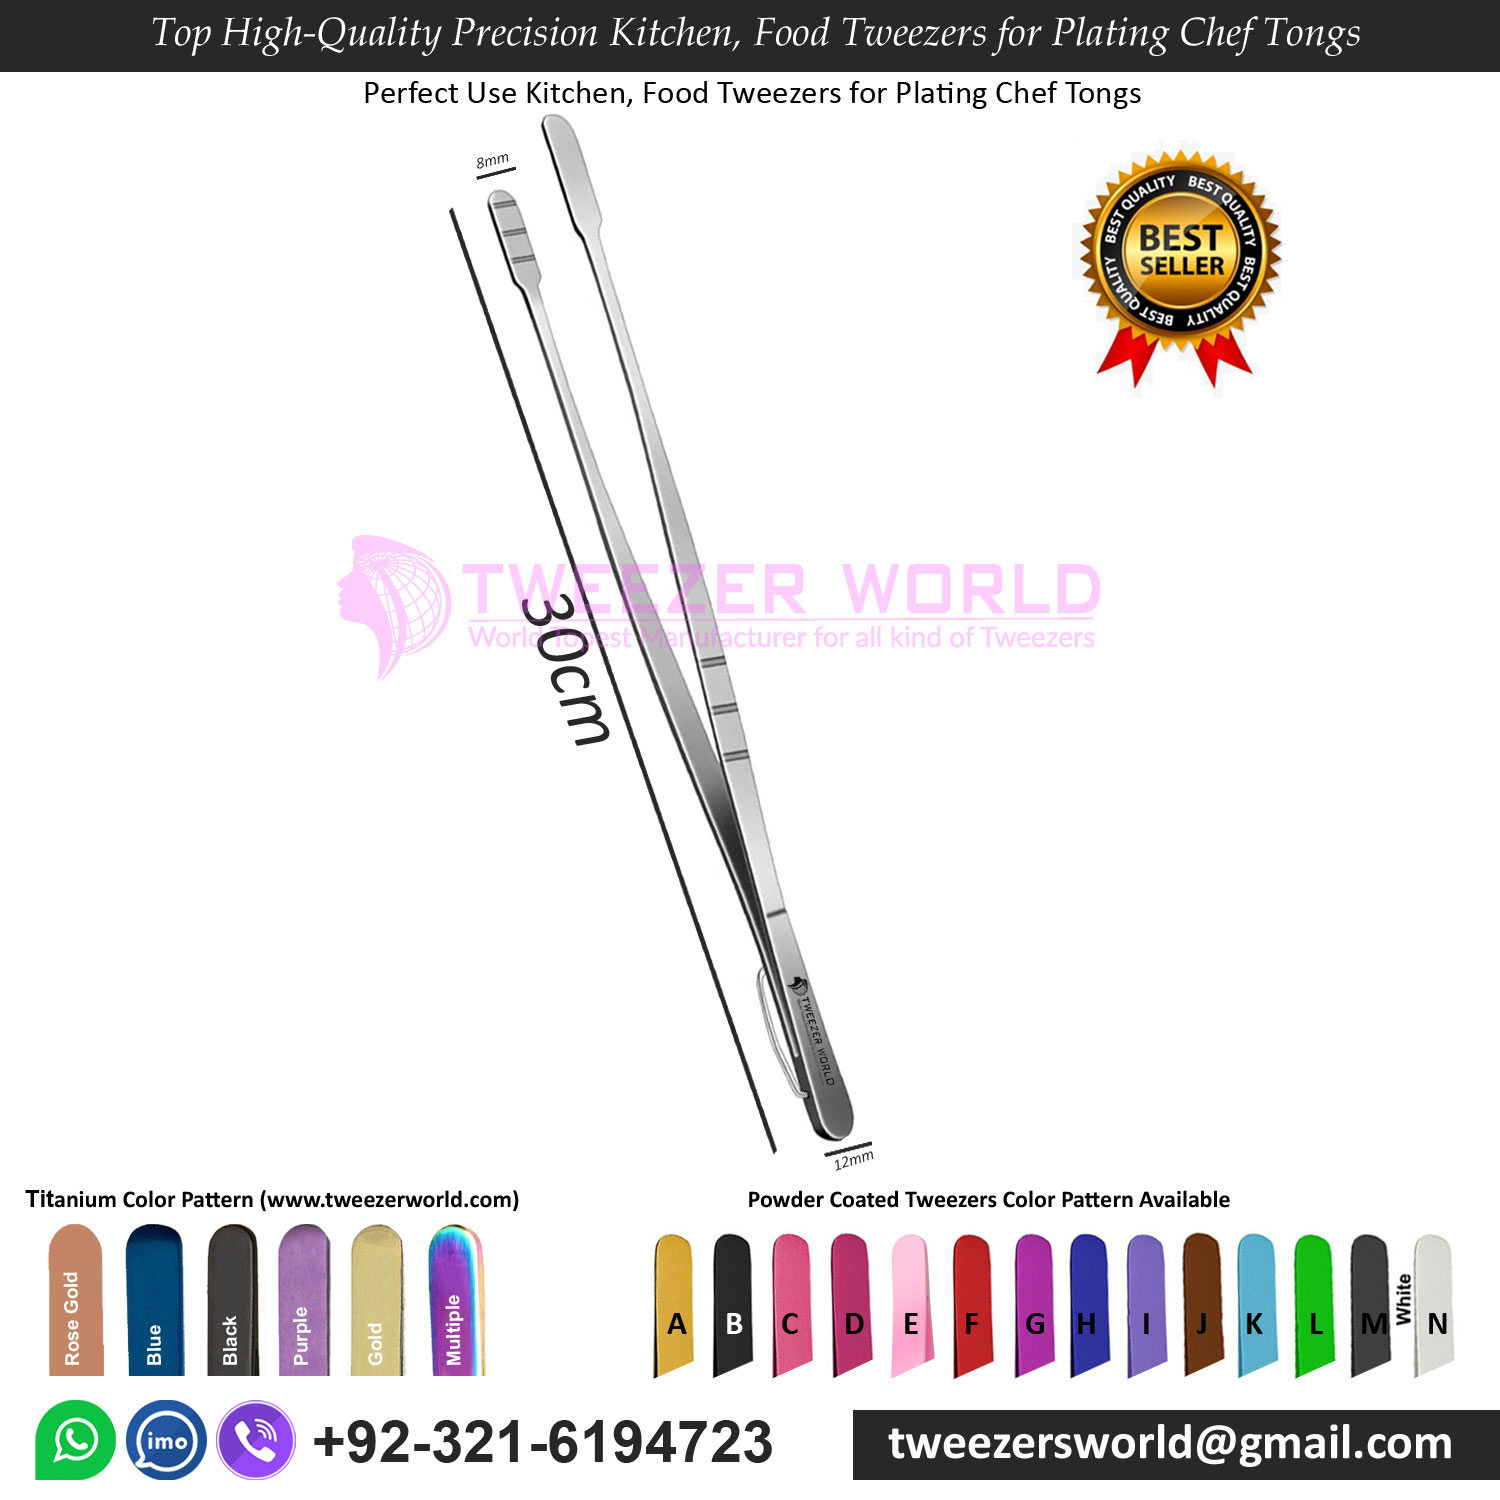 Top High-Quality Precision Kitchen, Food Tweezers for Plating Chef Tongs